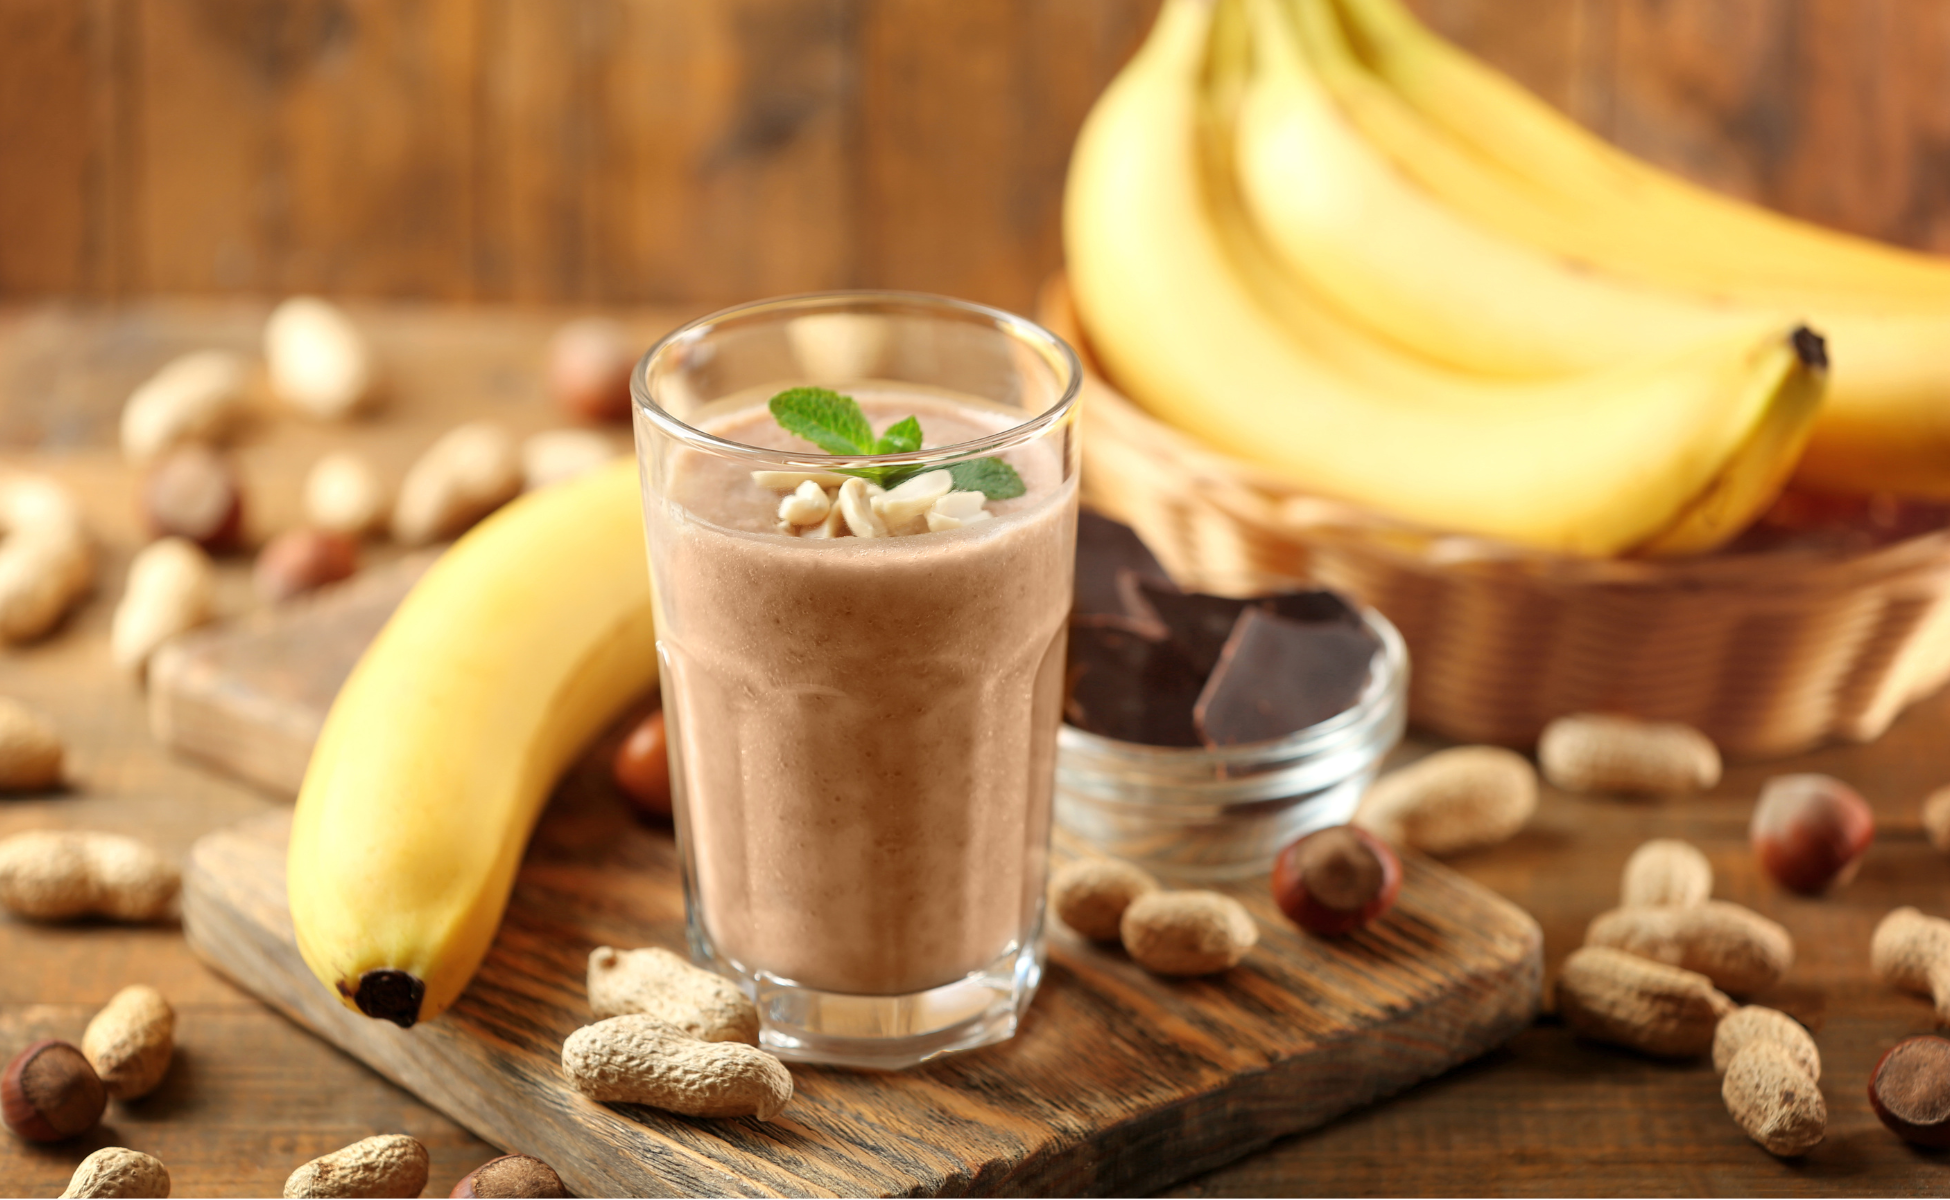 Toni Julian's delicious chocolate, peanut butter banana smoothie with balanced macronutrients